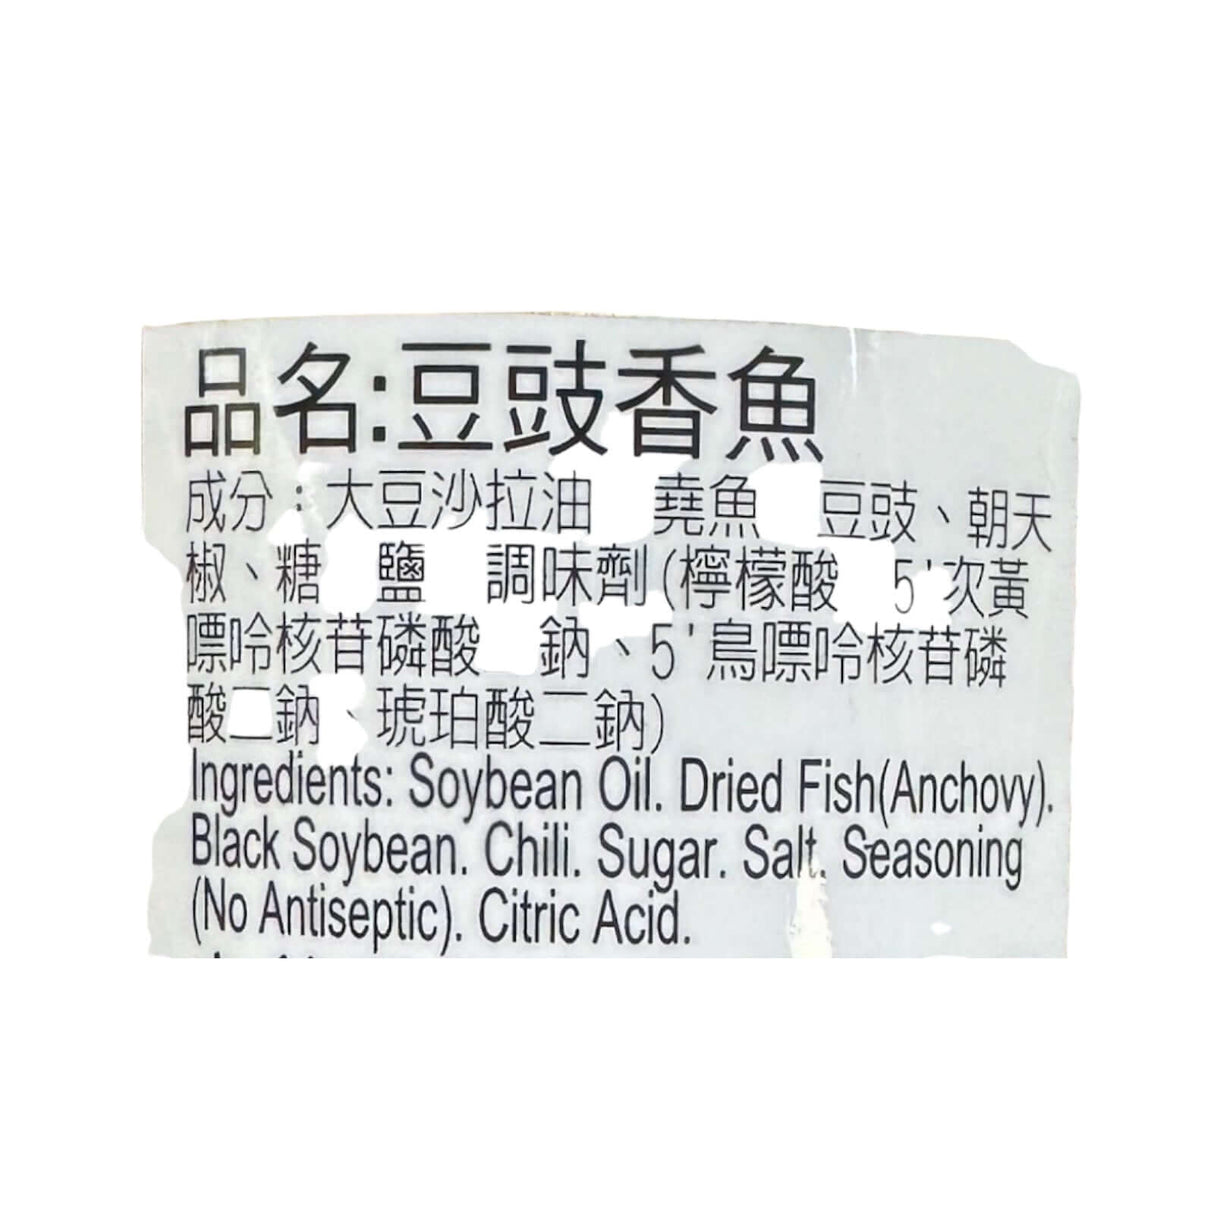 NING CHI Fried Fish Oil (Whole)